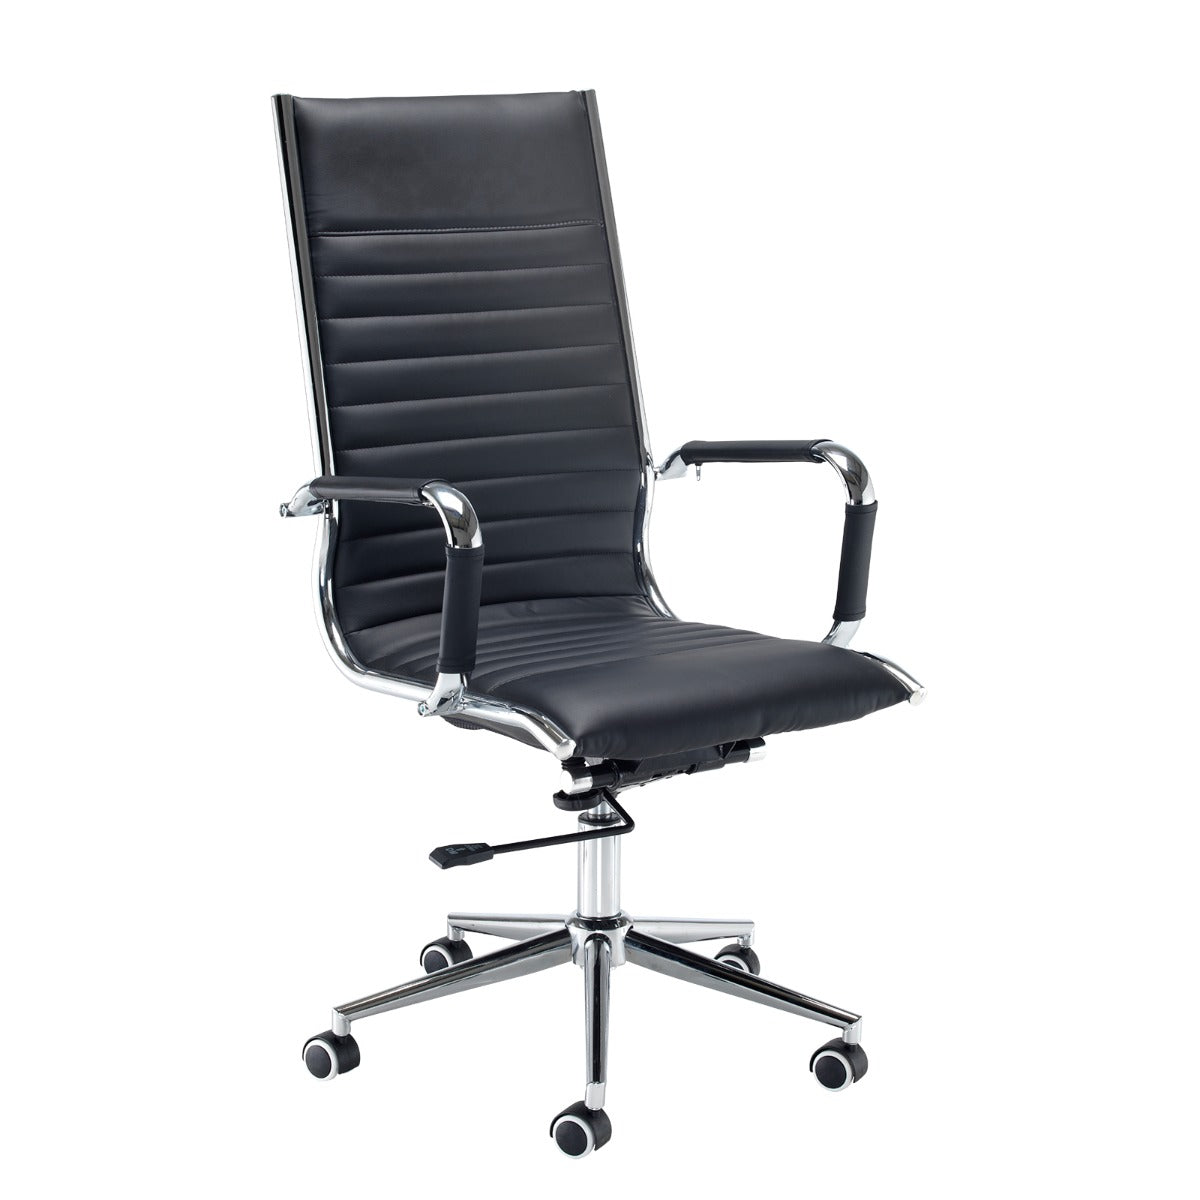 Bari High Back Eames Style Office Chair UK